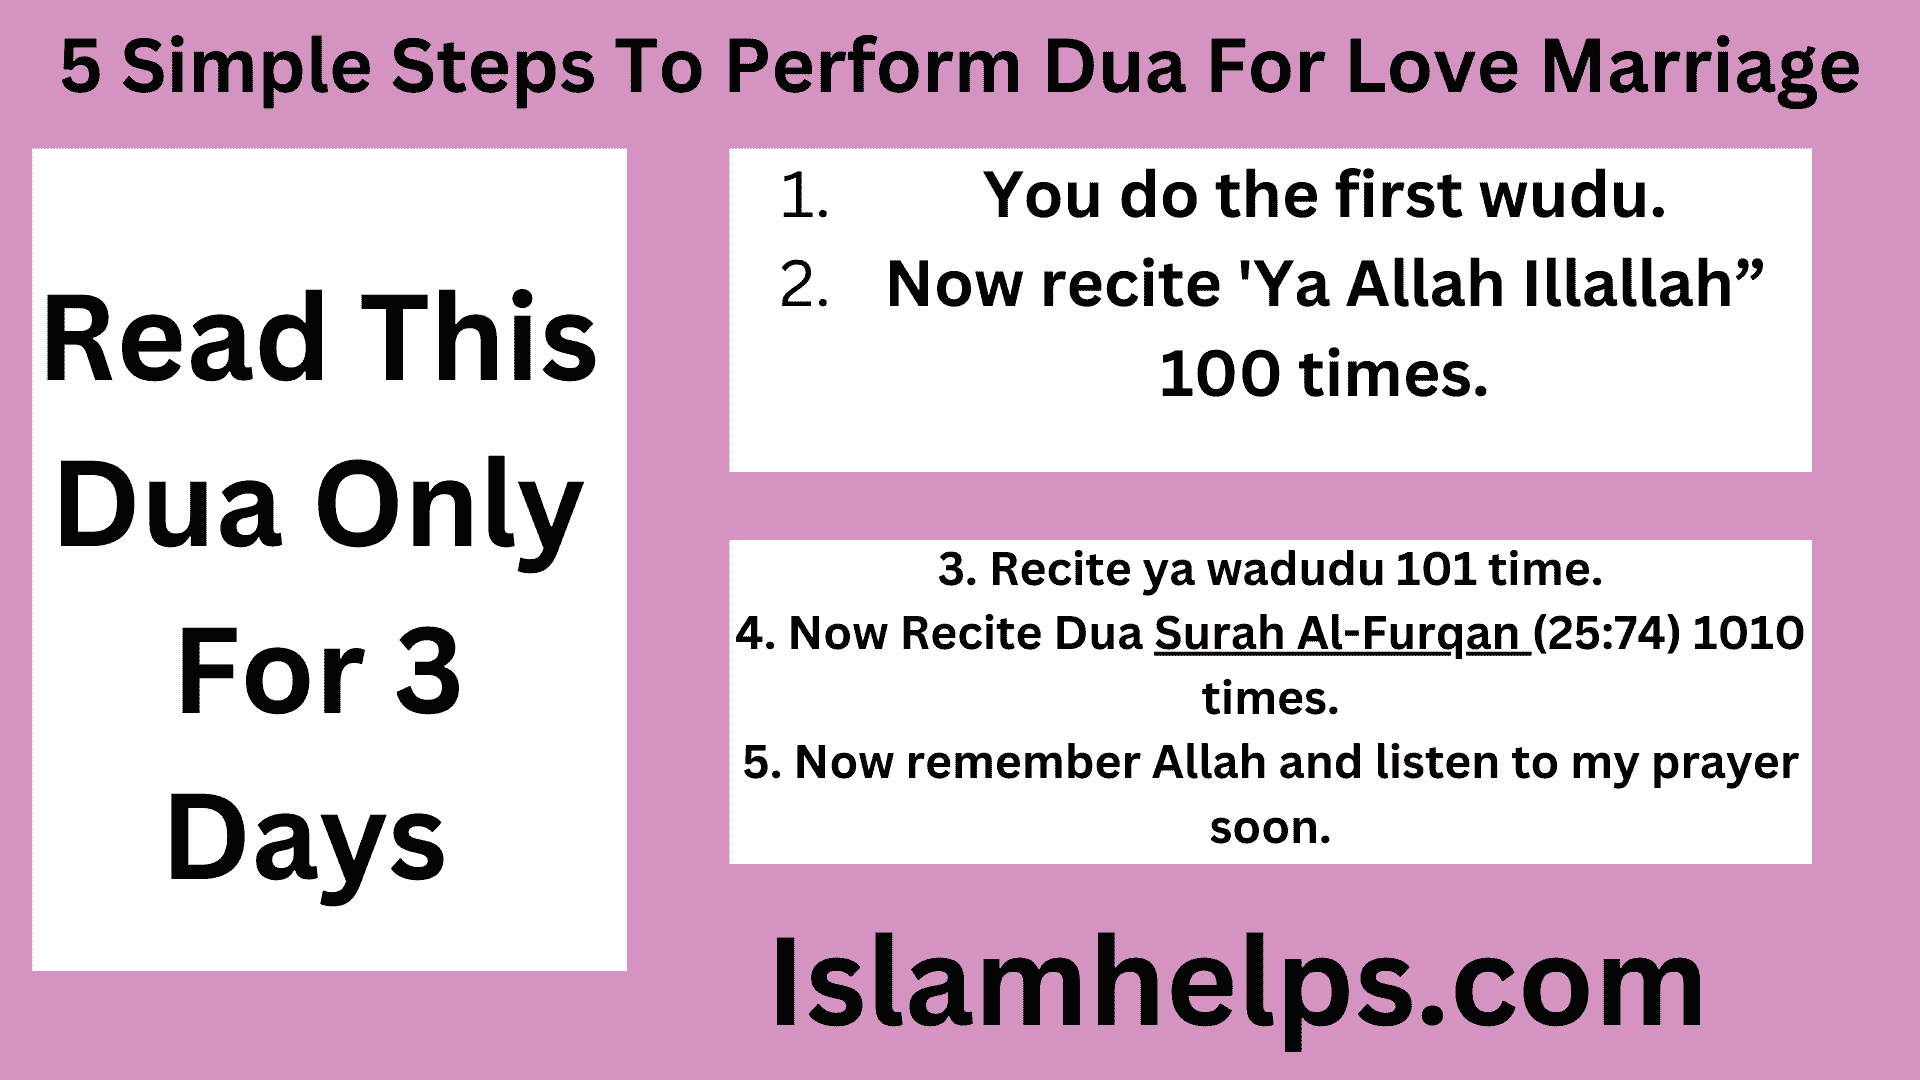 5 Simple Steps To Perform Dua For Love Marriage